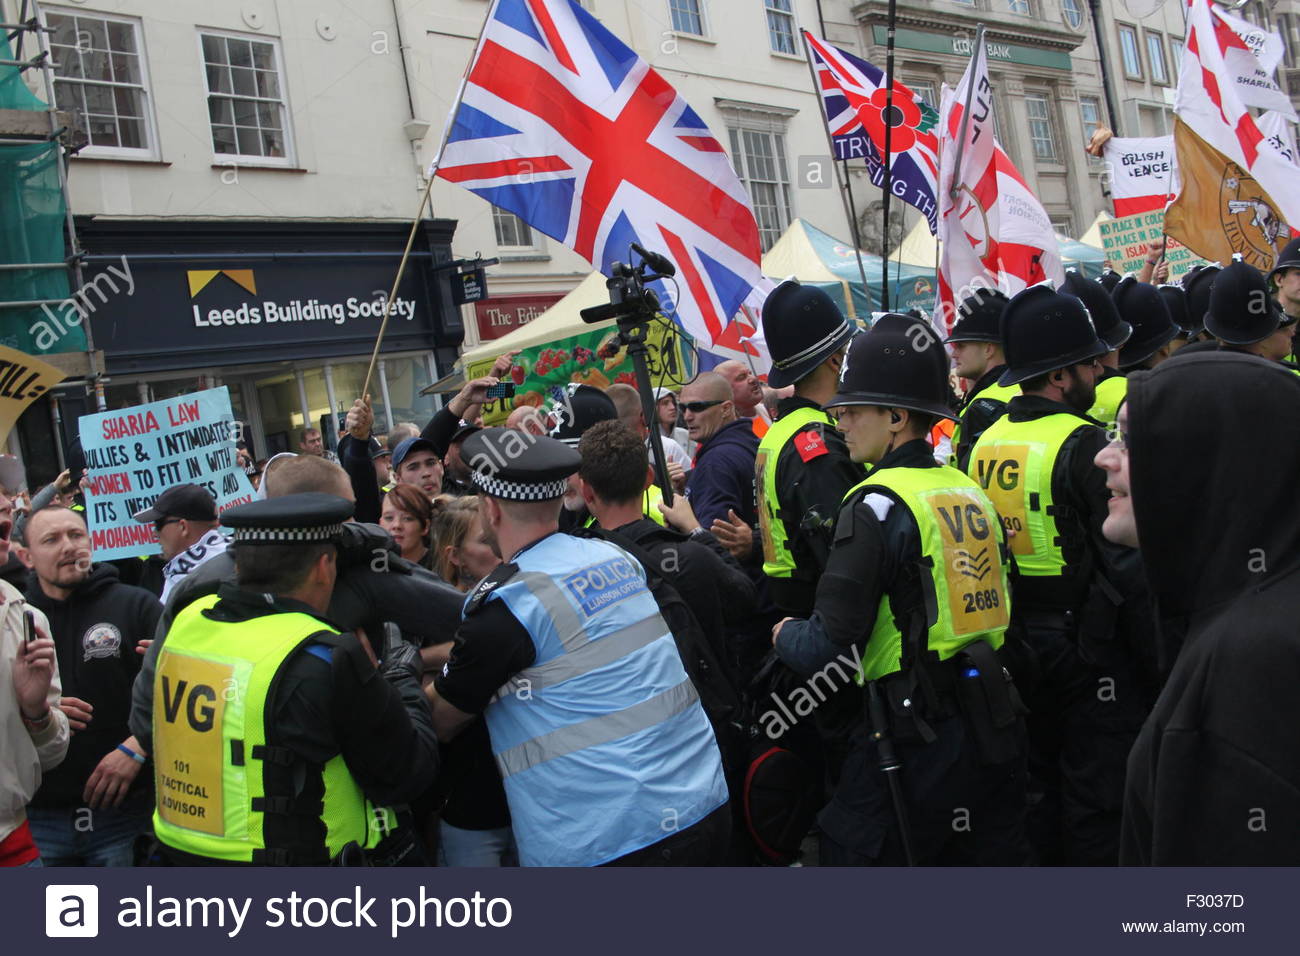 Image result for edl clash with police